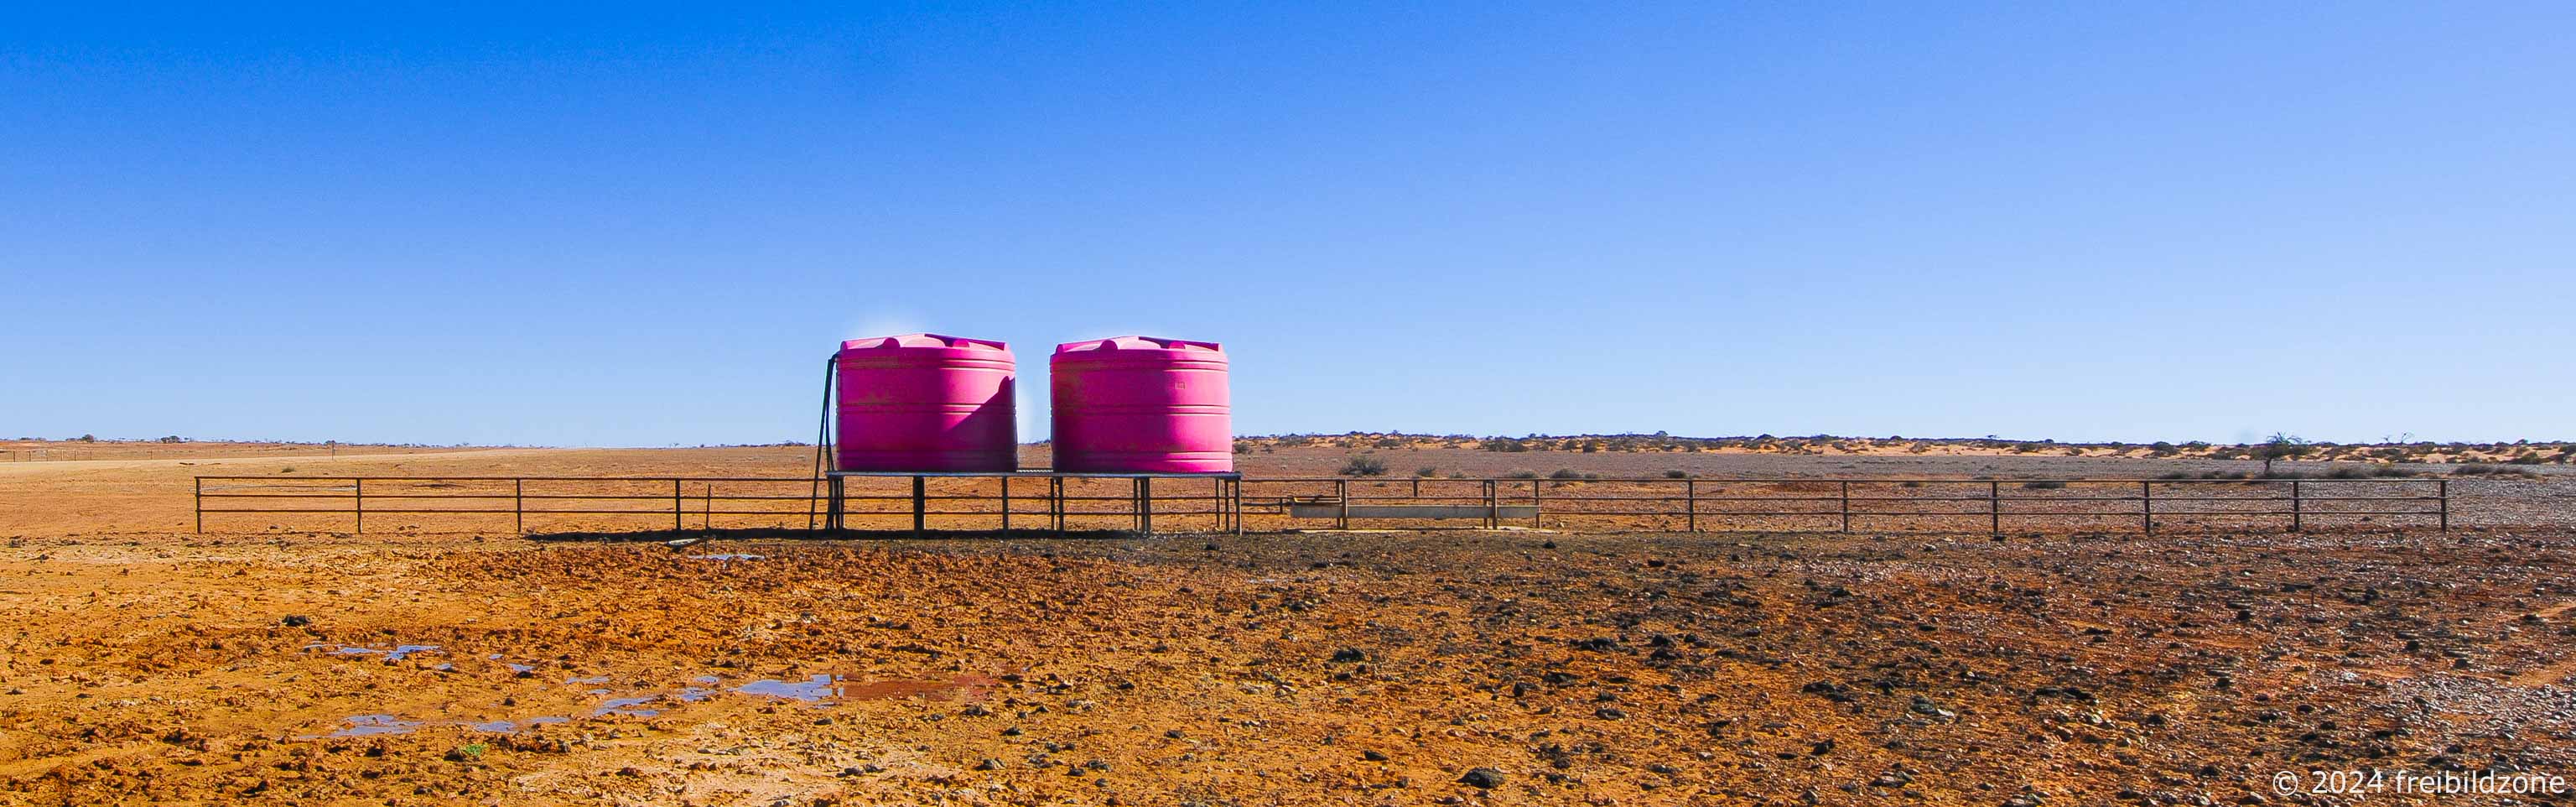 Outback water reservoirs, Red Center, Australia